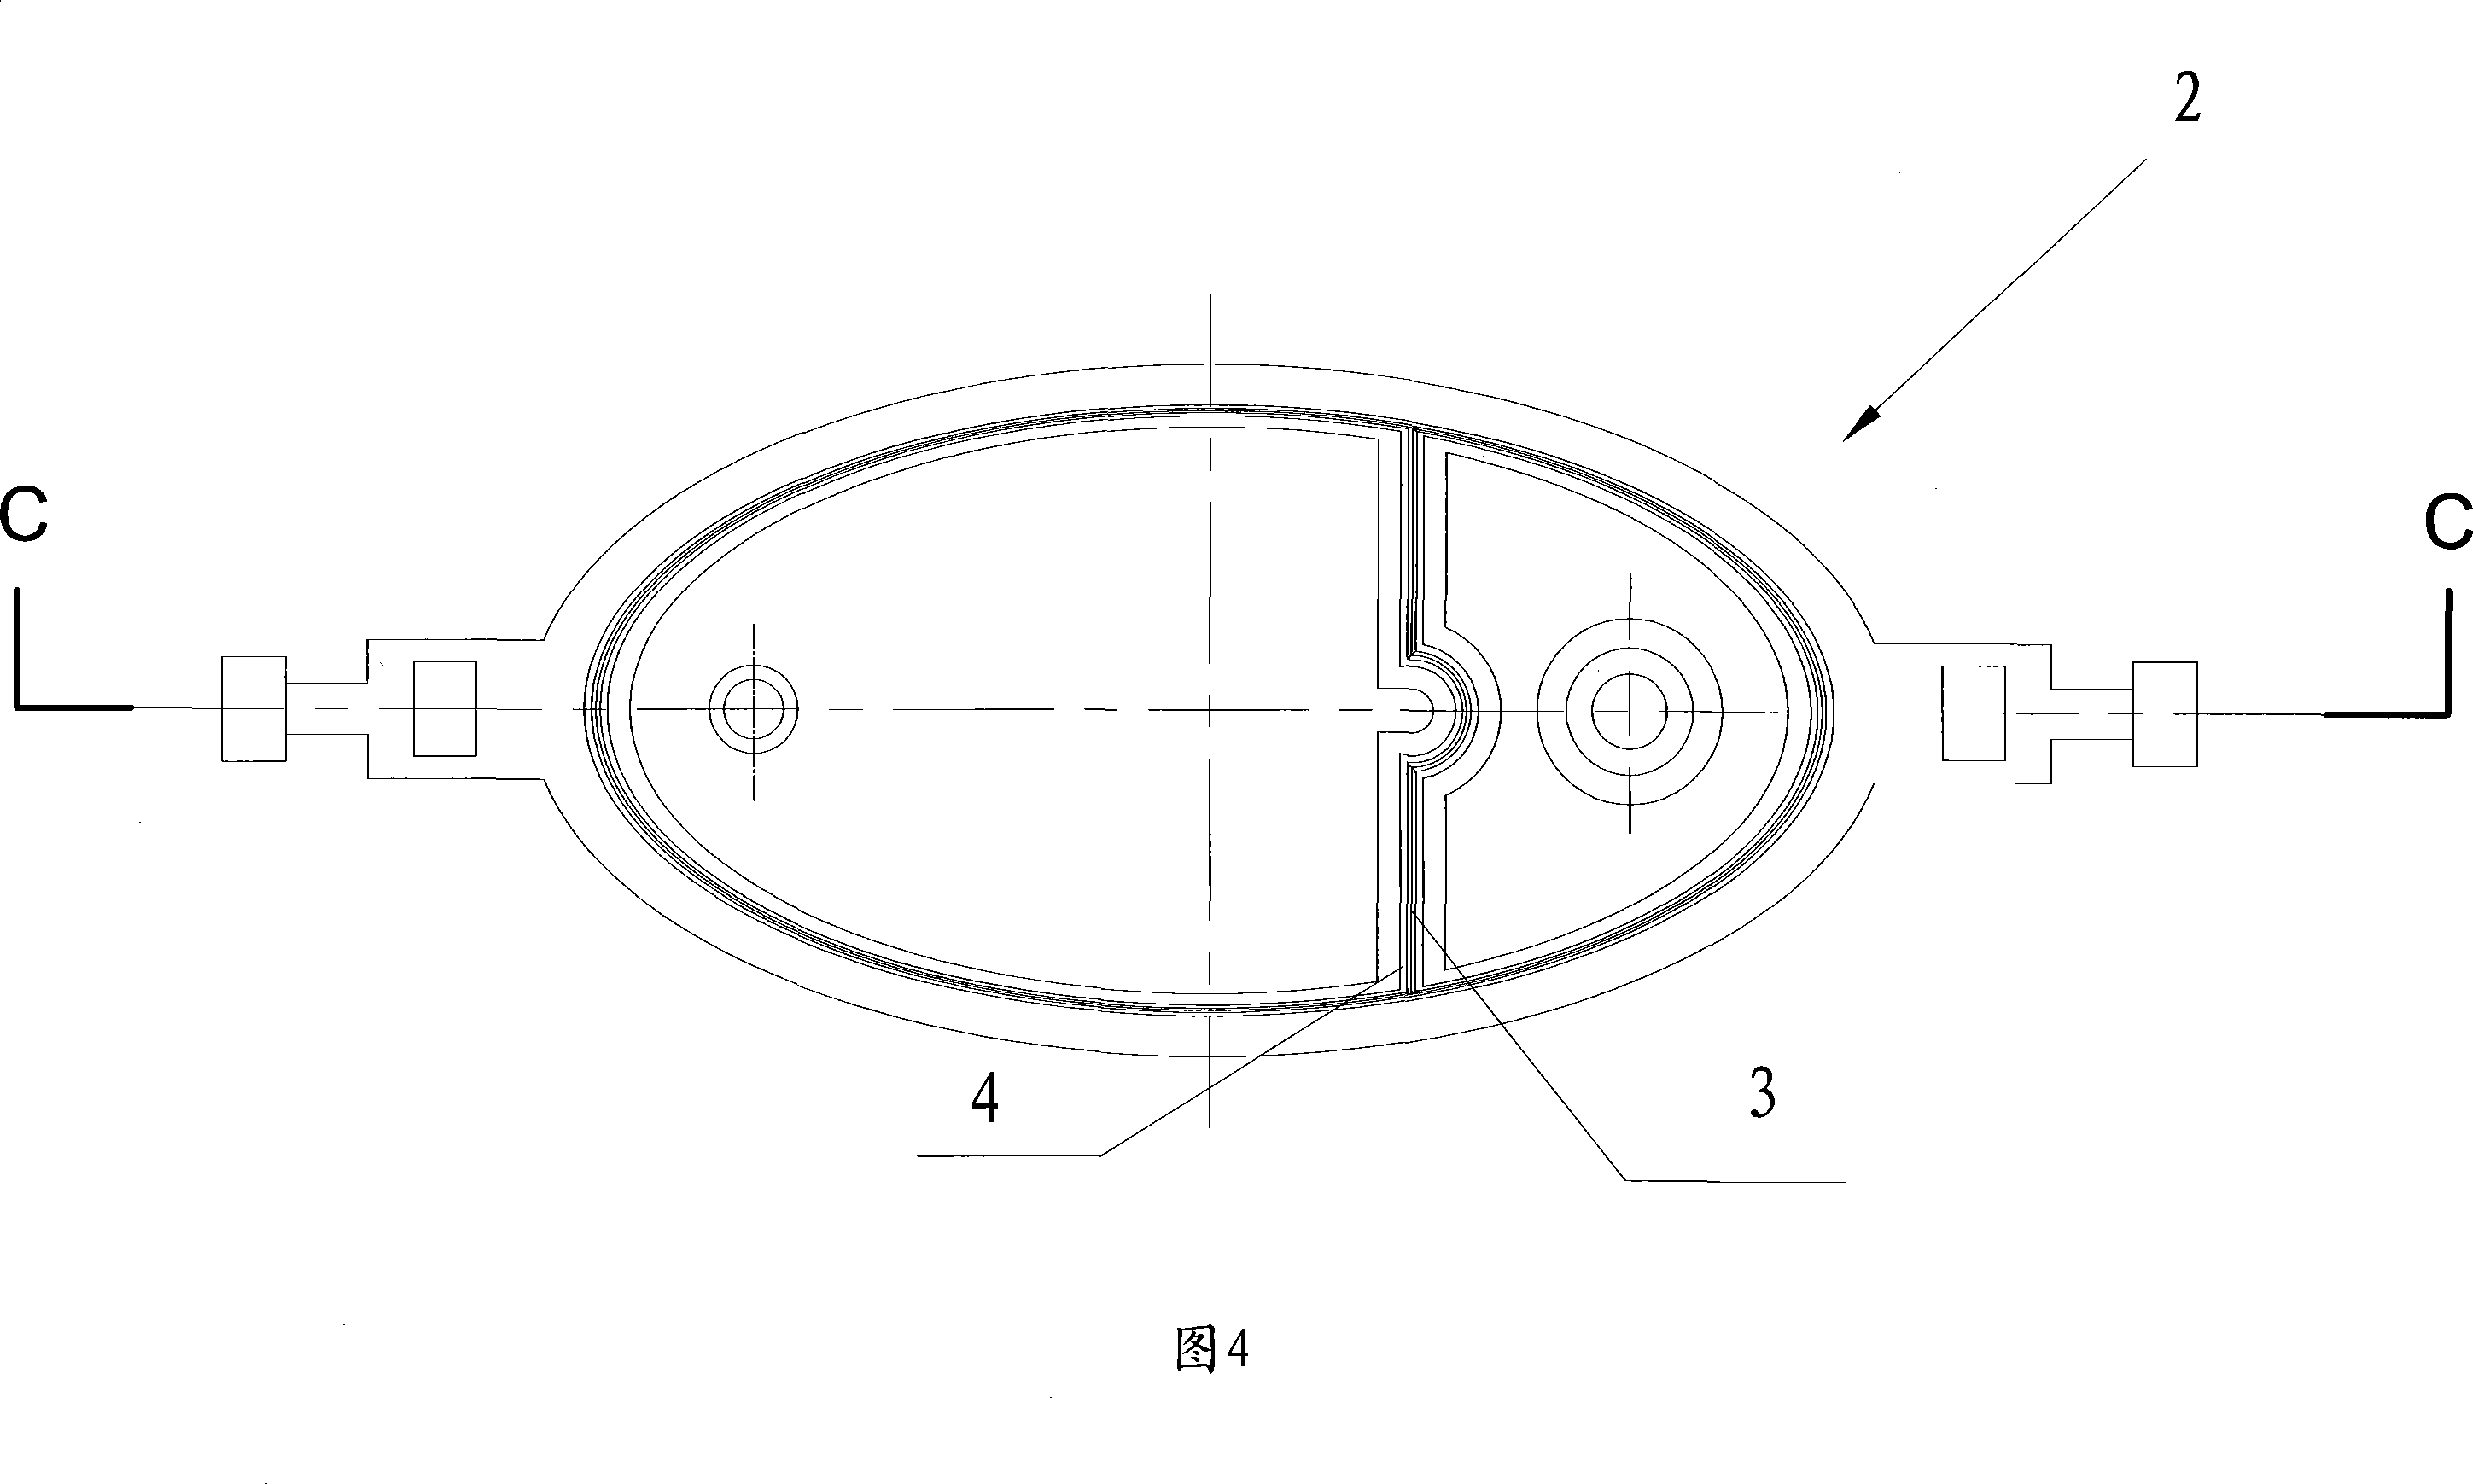 Method for manufacturing drainage bottle